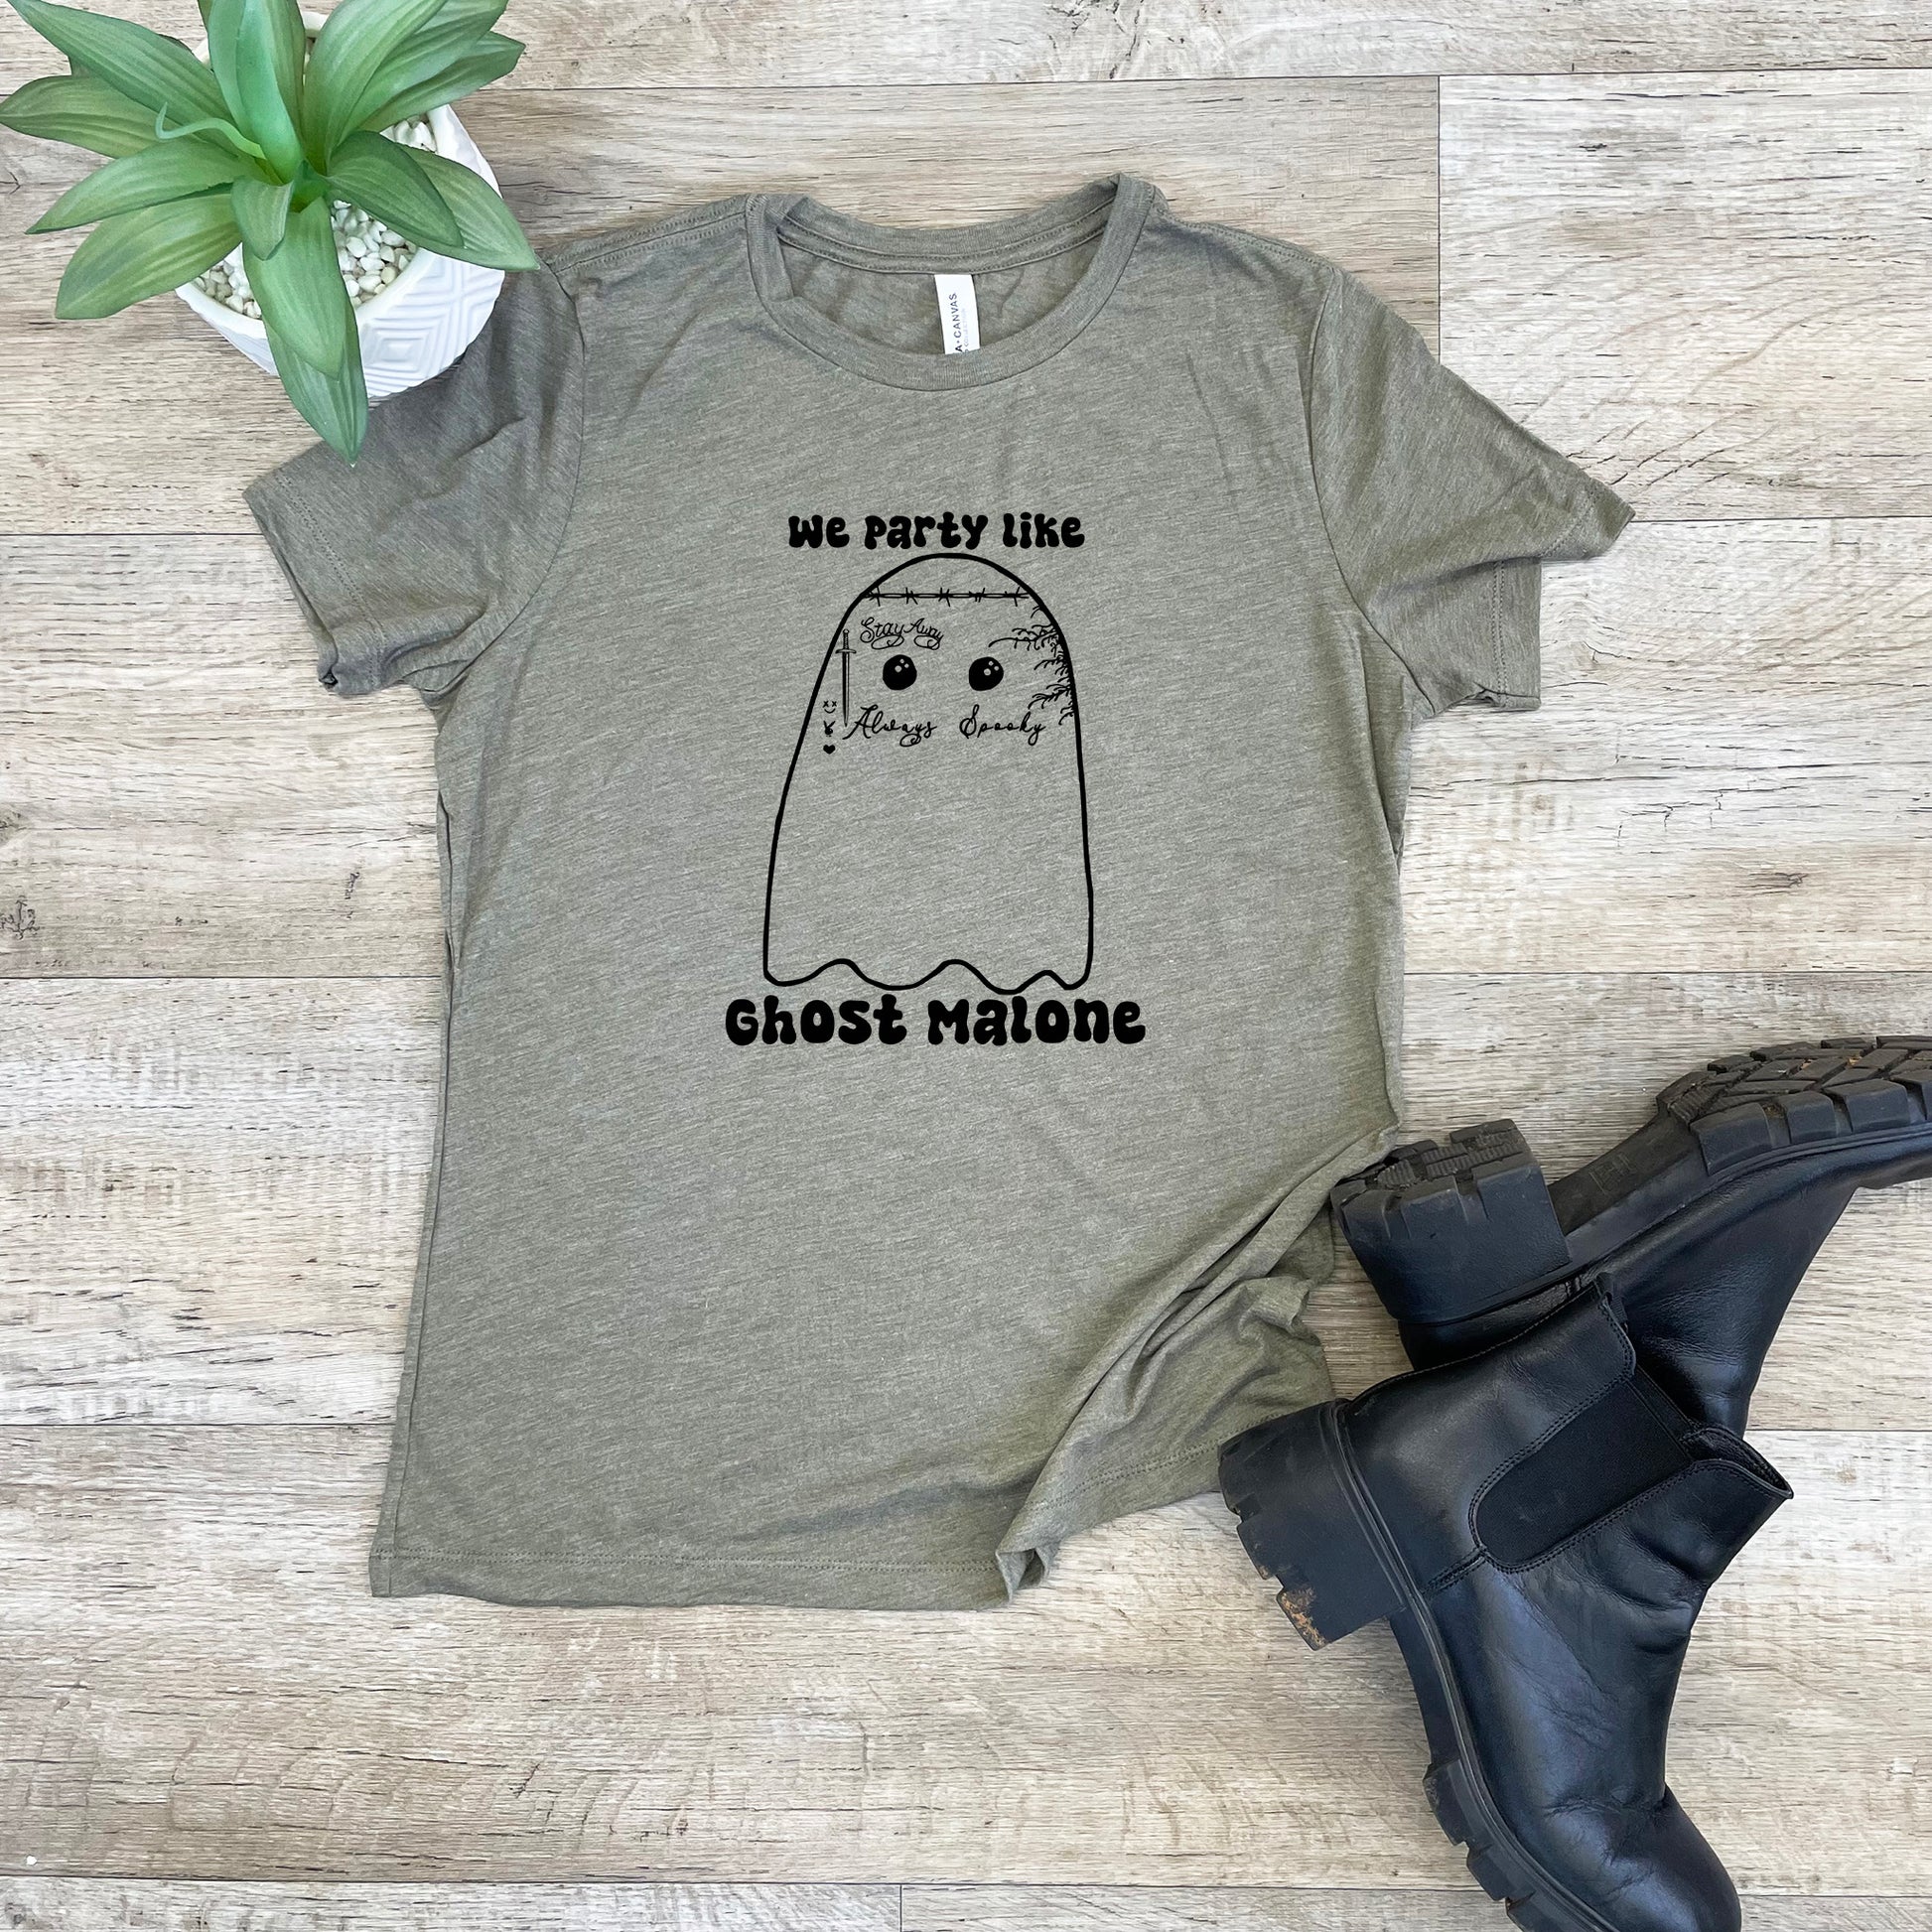 a t - shirt that says, no party like a ghost nation